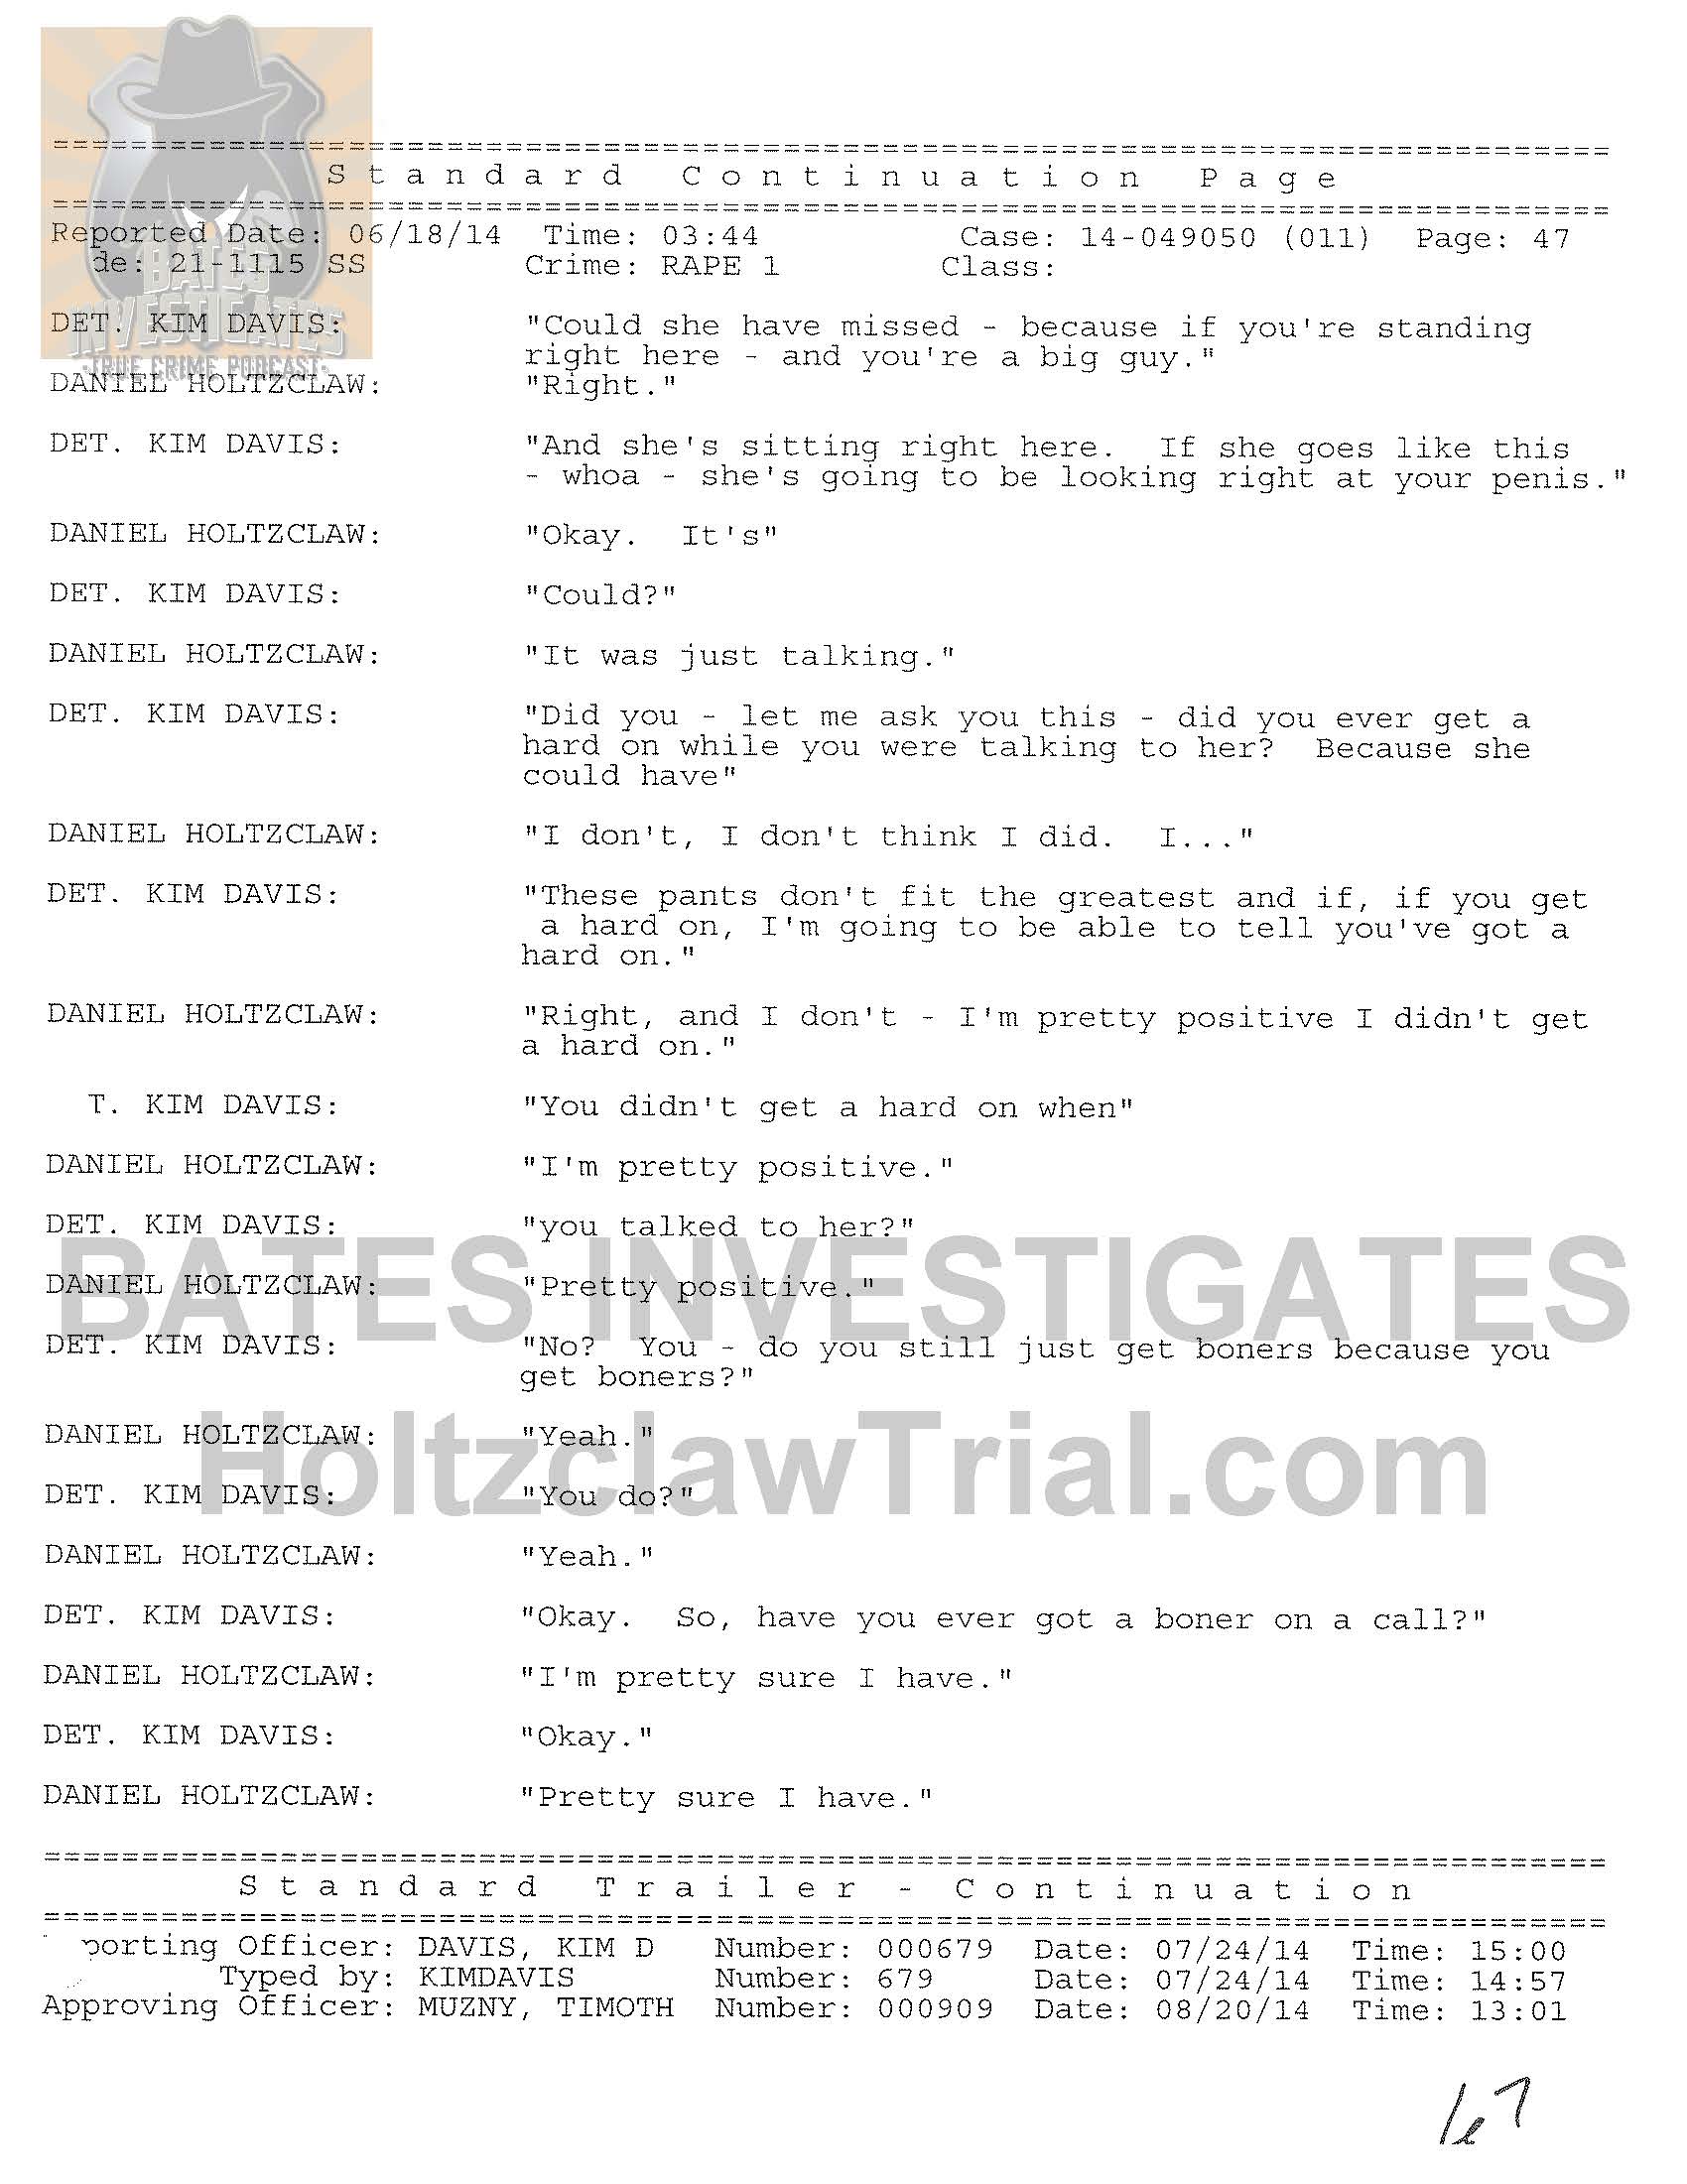 Holtzclaw Interrogation Transcript - Ep02 Redacted_Page_47.jpg